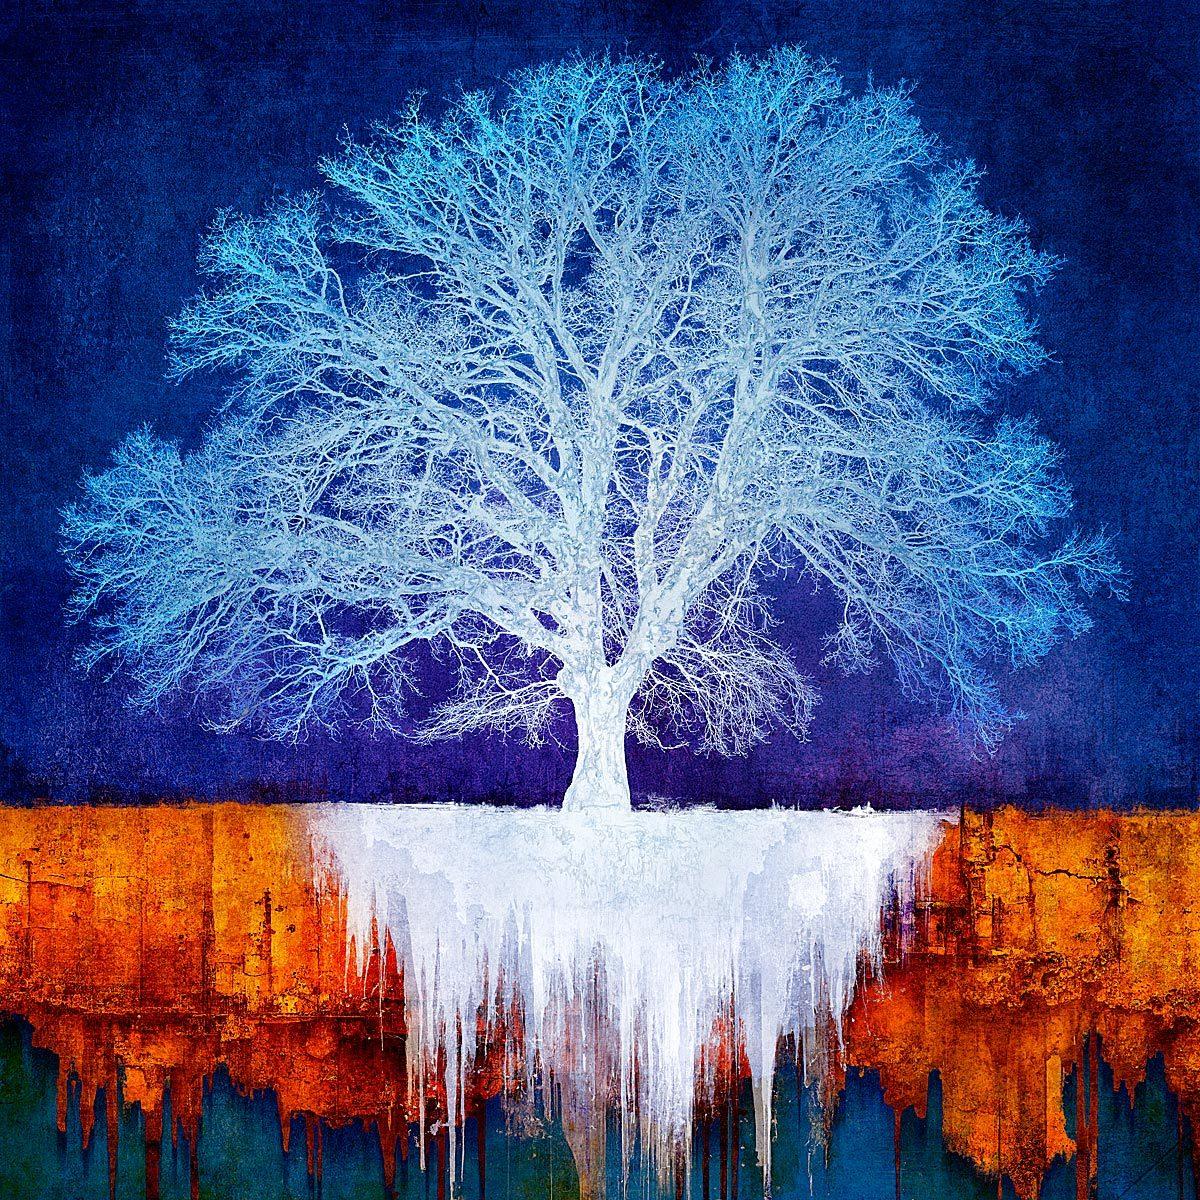 Of Ice and Fire - Colourful, Bright, Atmospheric, Tree, Nature, Digital Art - Mixed Media Art by Mark Munroe Preston